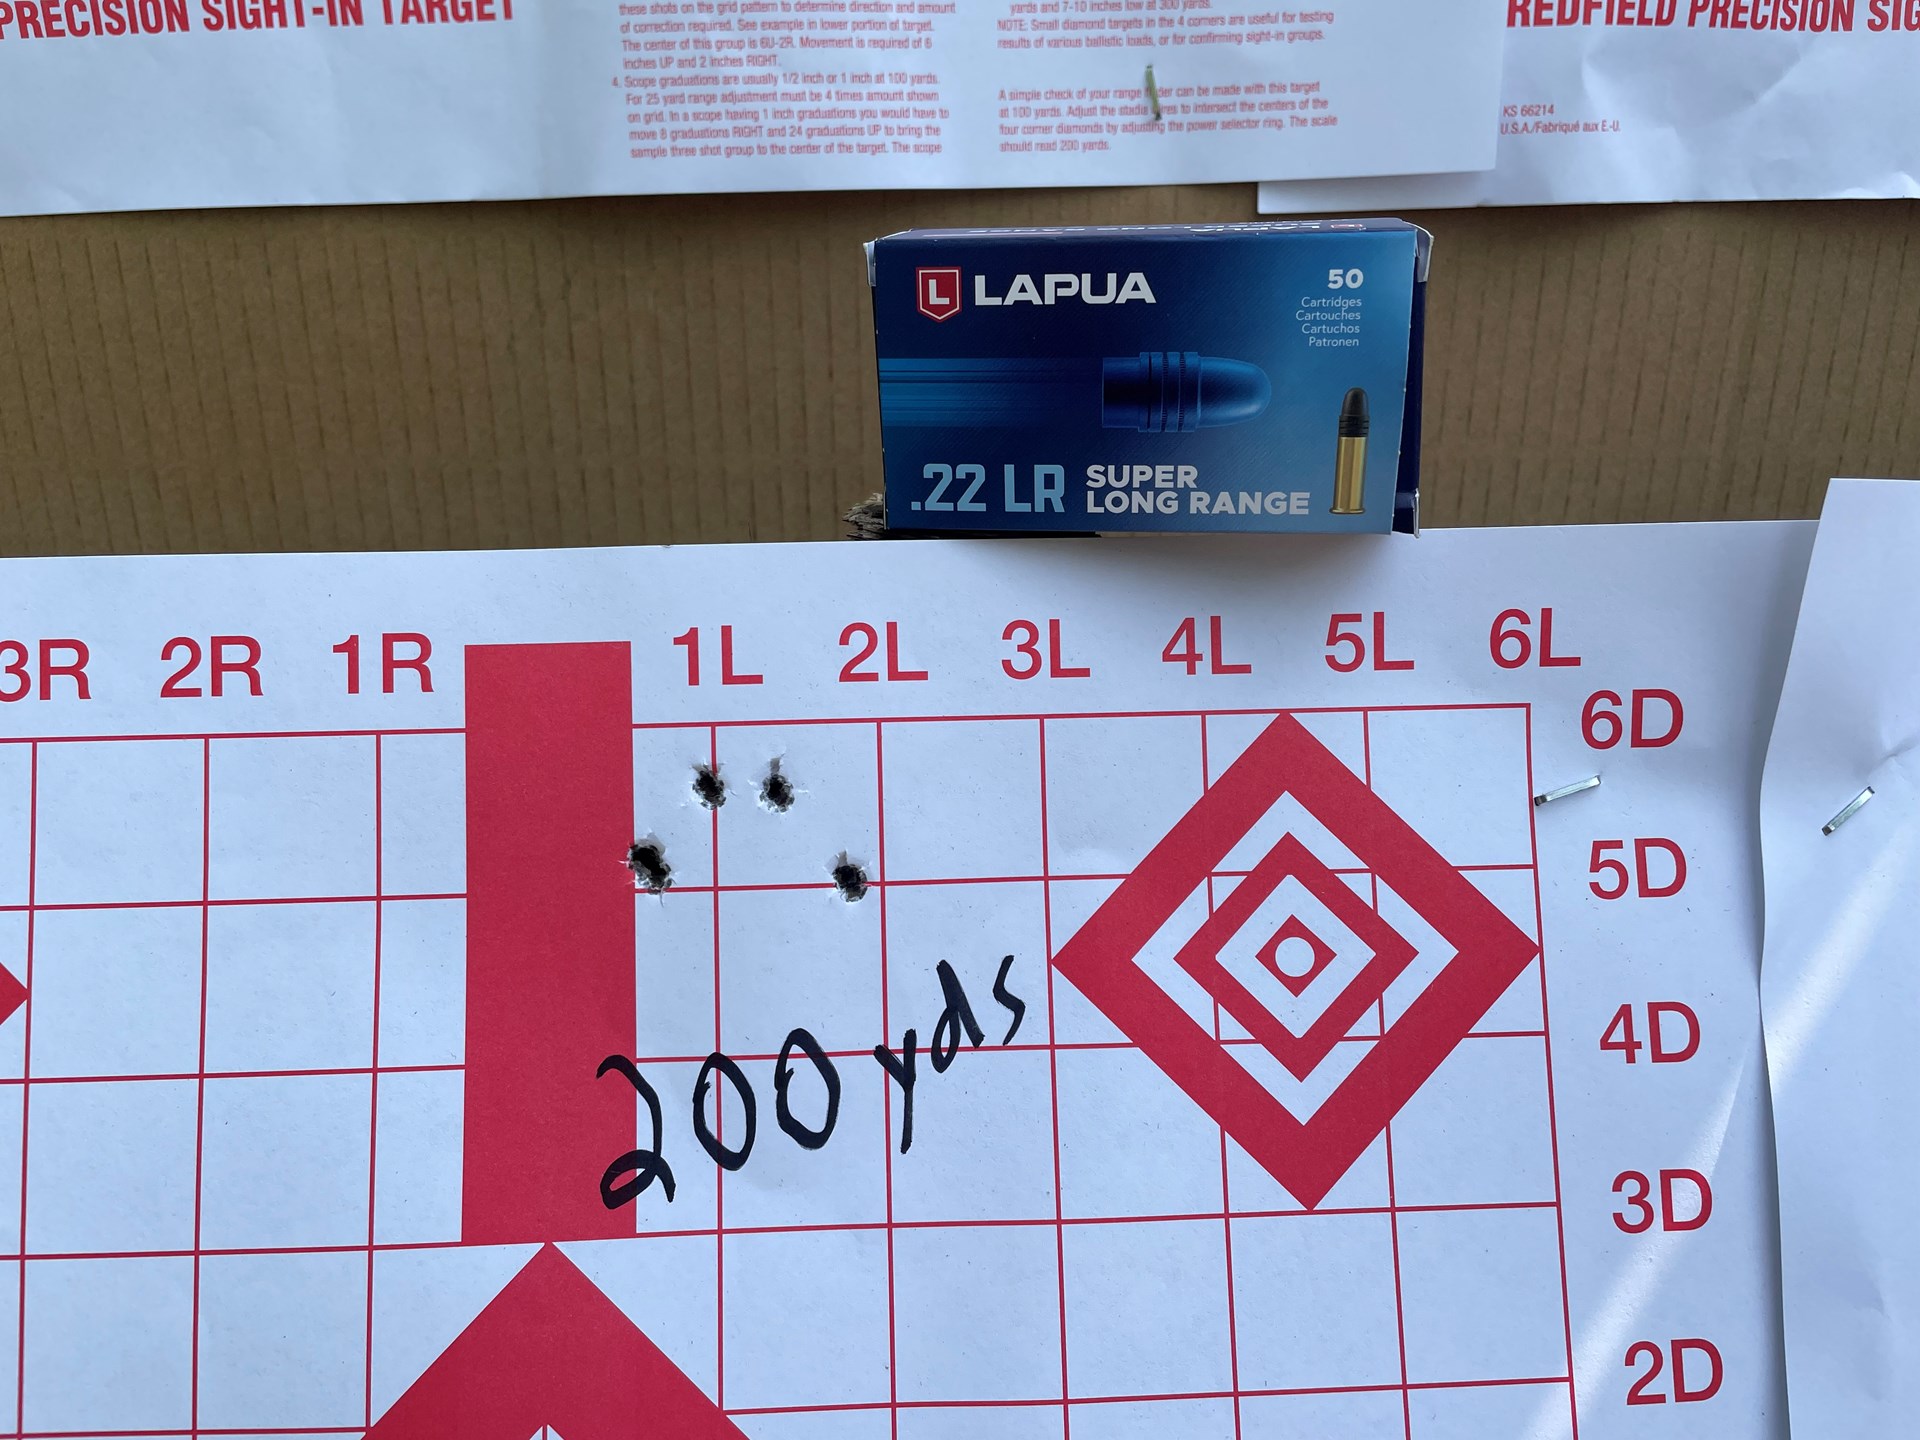 Lapua Super Long Range .22 LR ammunition box shown with target and notation for 200 yards accuracy group